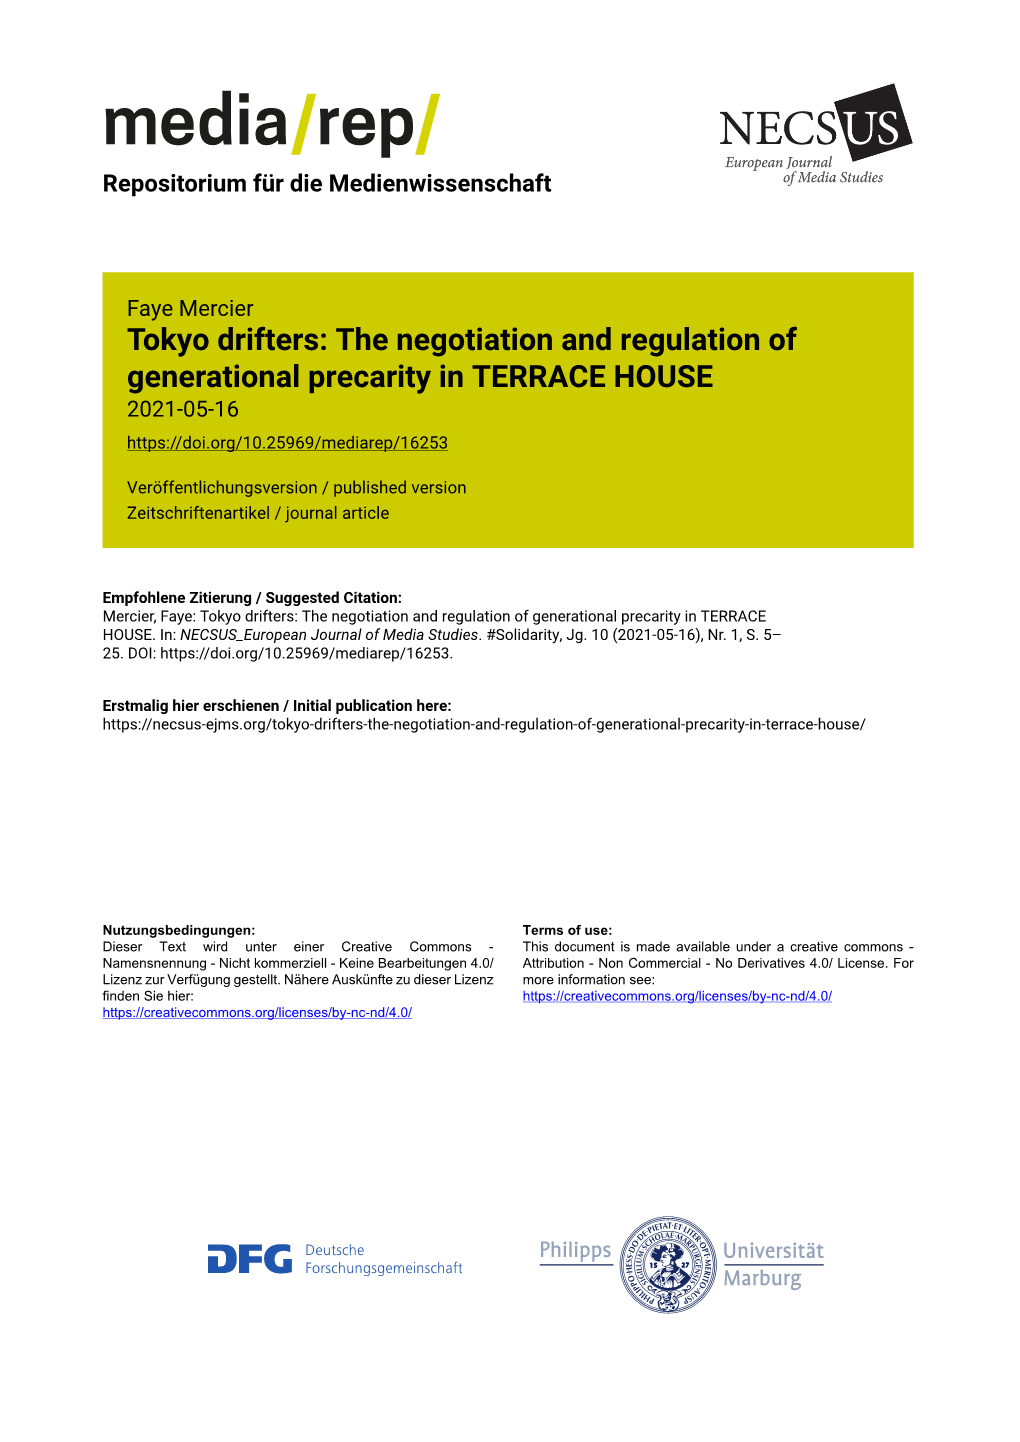 Tokyo Drifters: the Negotiation and Regulation of Generational Precarity in TERRACE HOUSE 2021-05-16